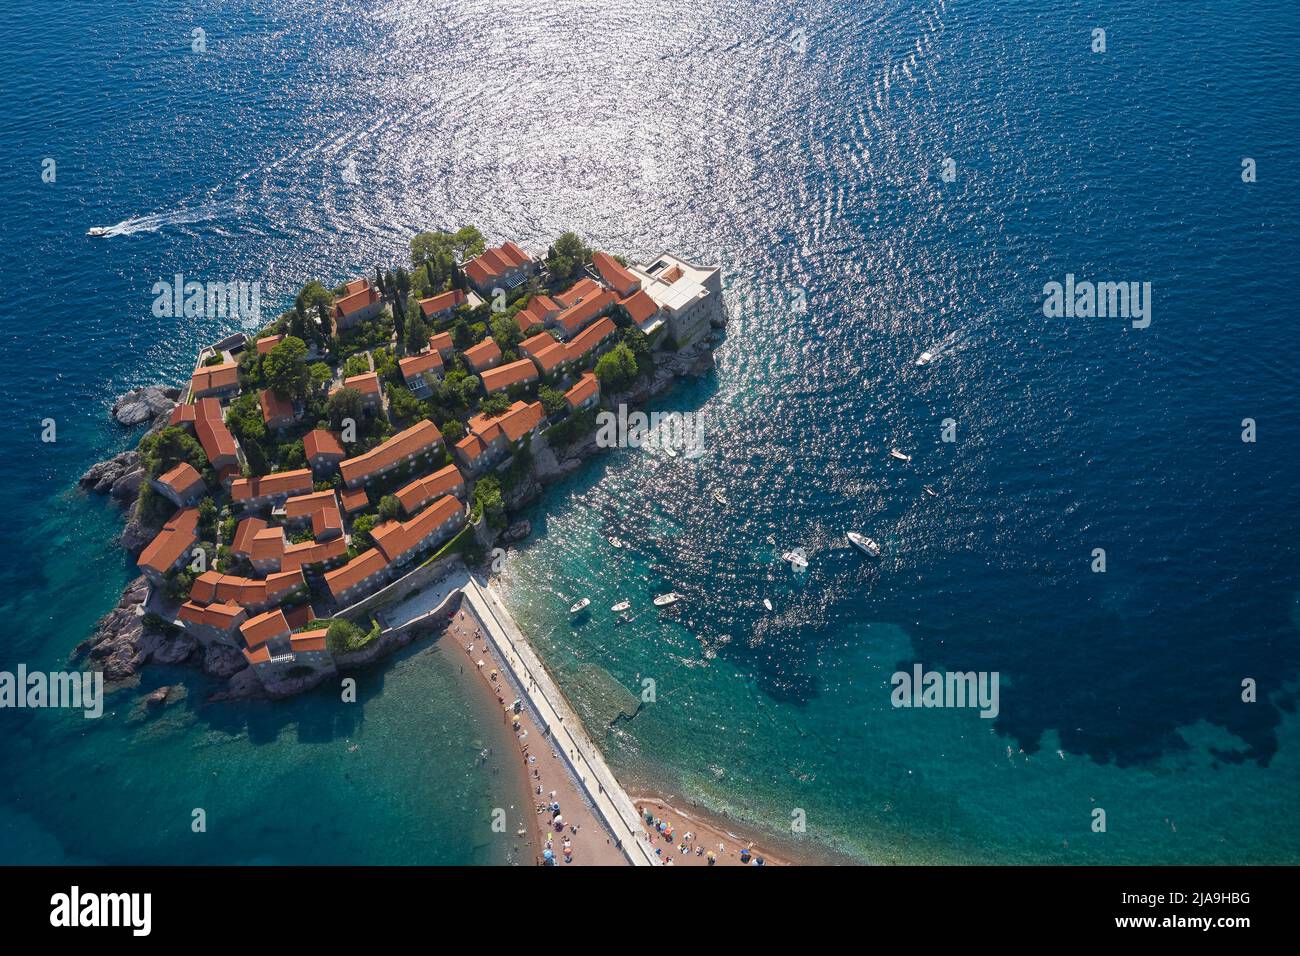 Island in sea with houses, Aerial view of Sveti Stefan, Montenegro Stock Photo